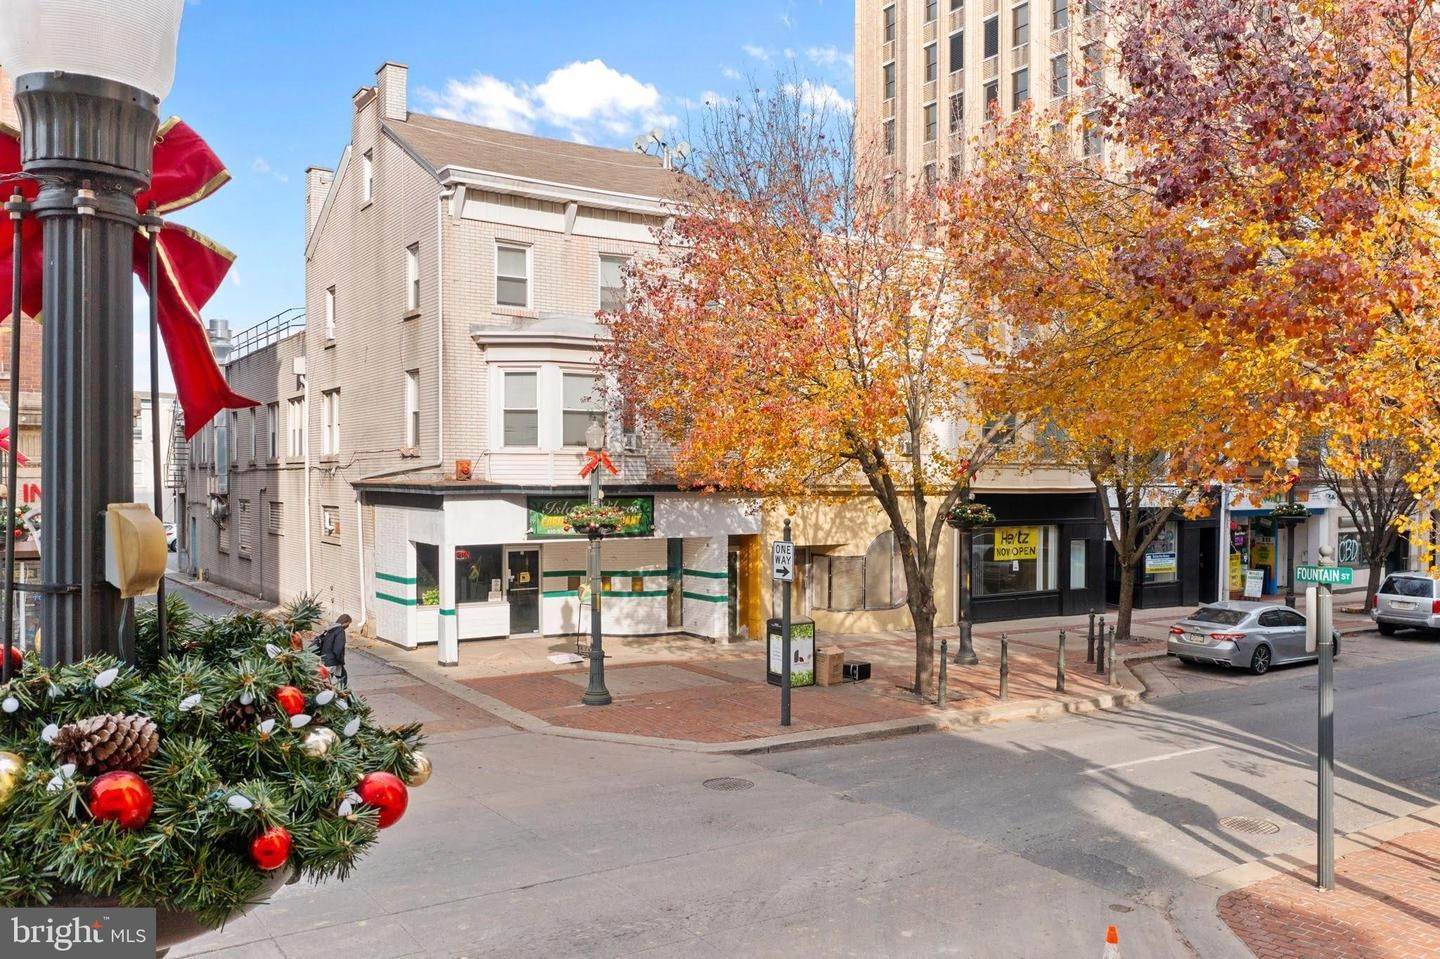 Commercial for Sale at 915-921 W HAMILTON Street Allentown, Pennsylvania 18101 United States